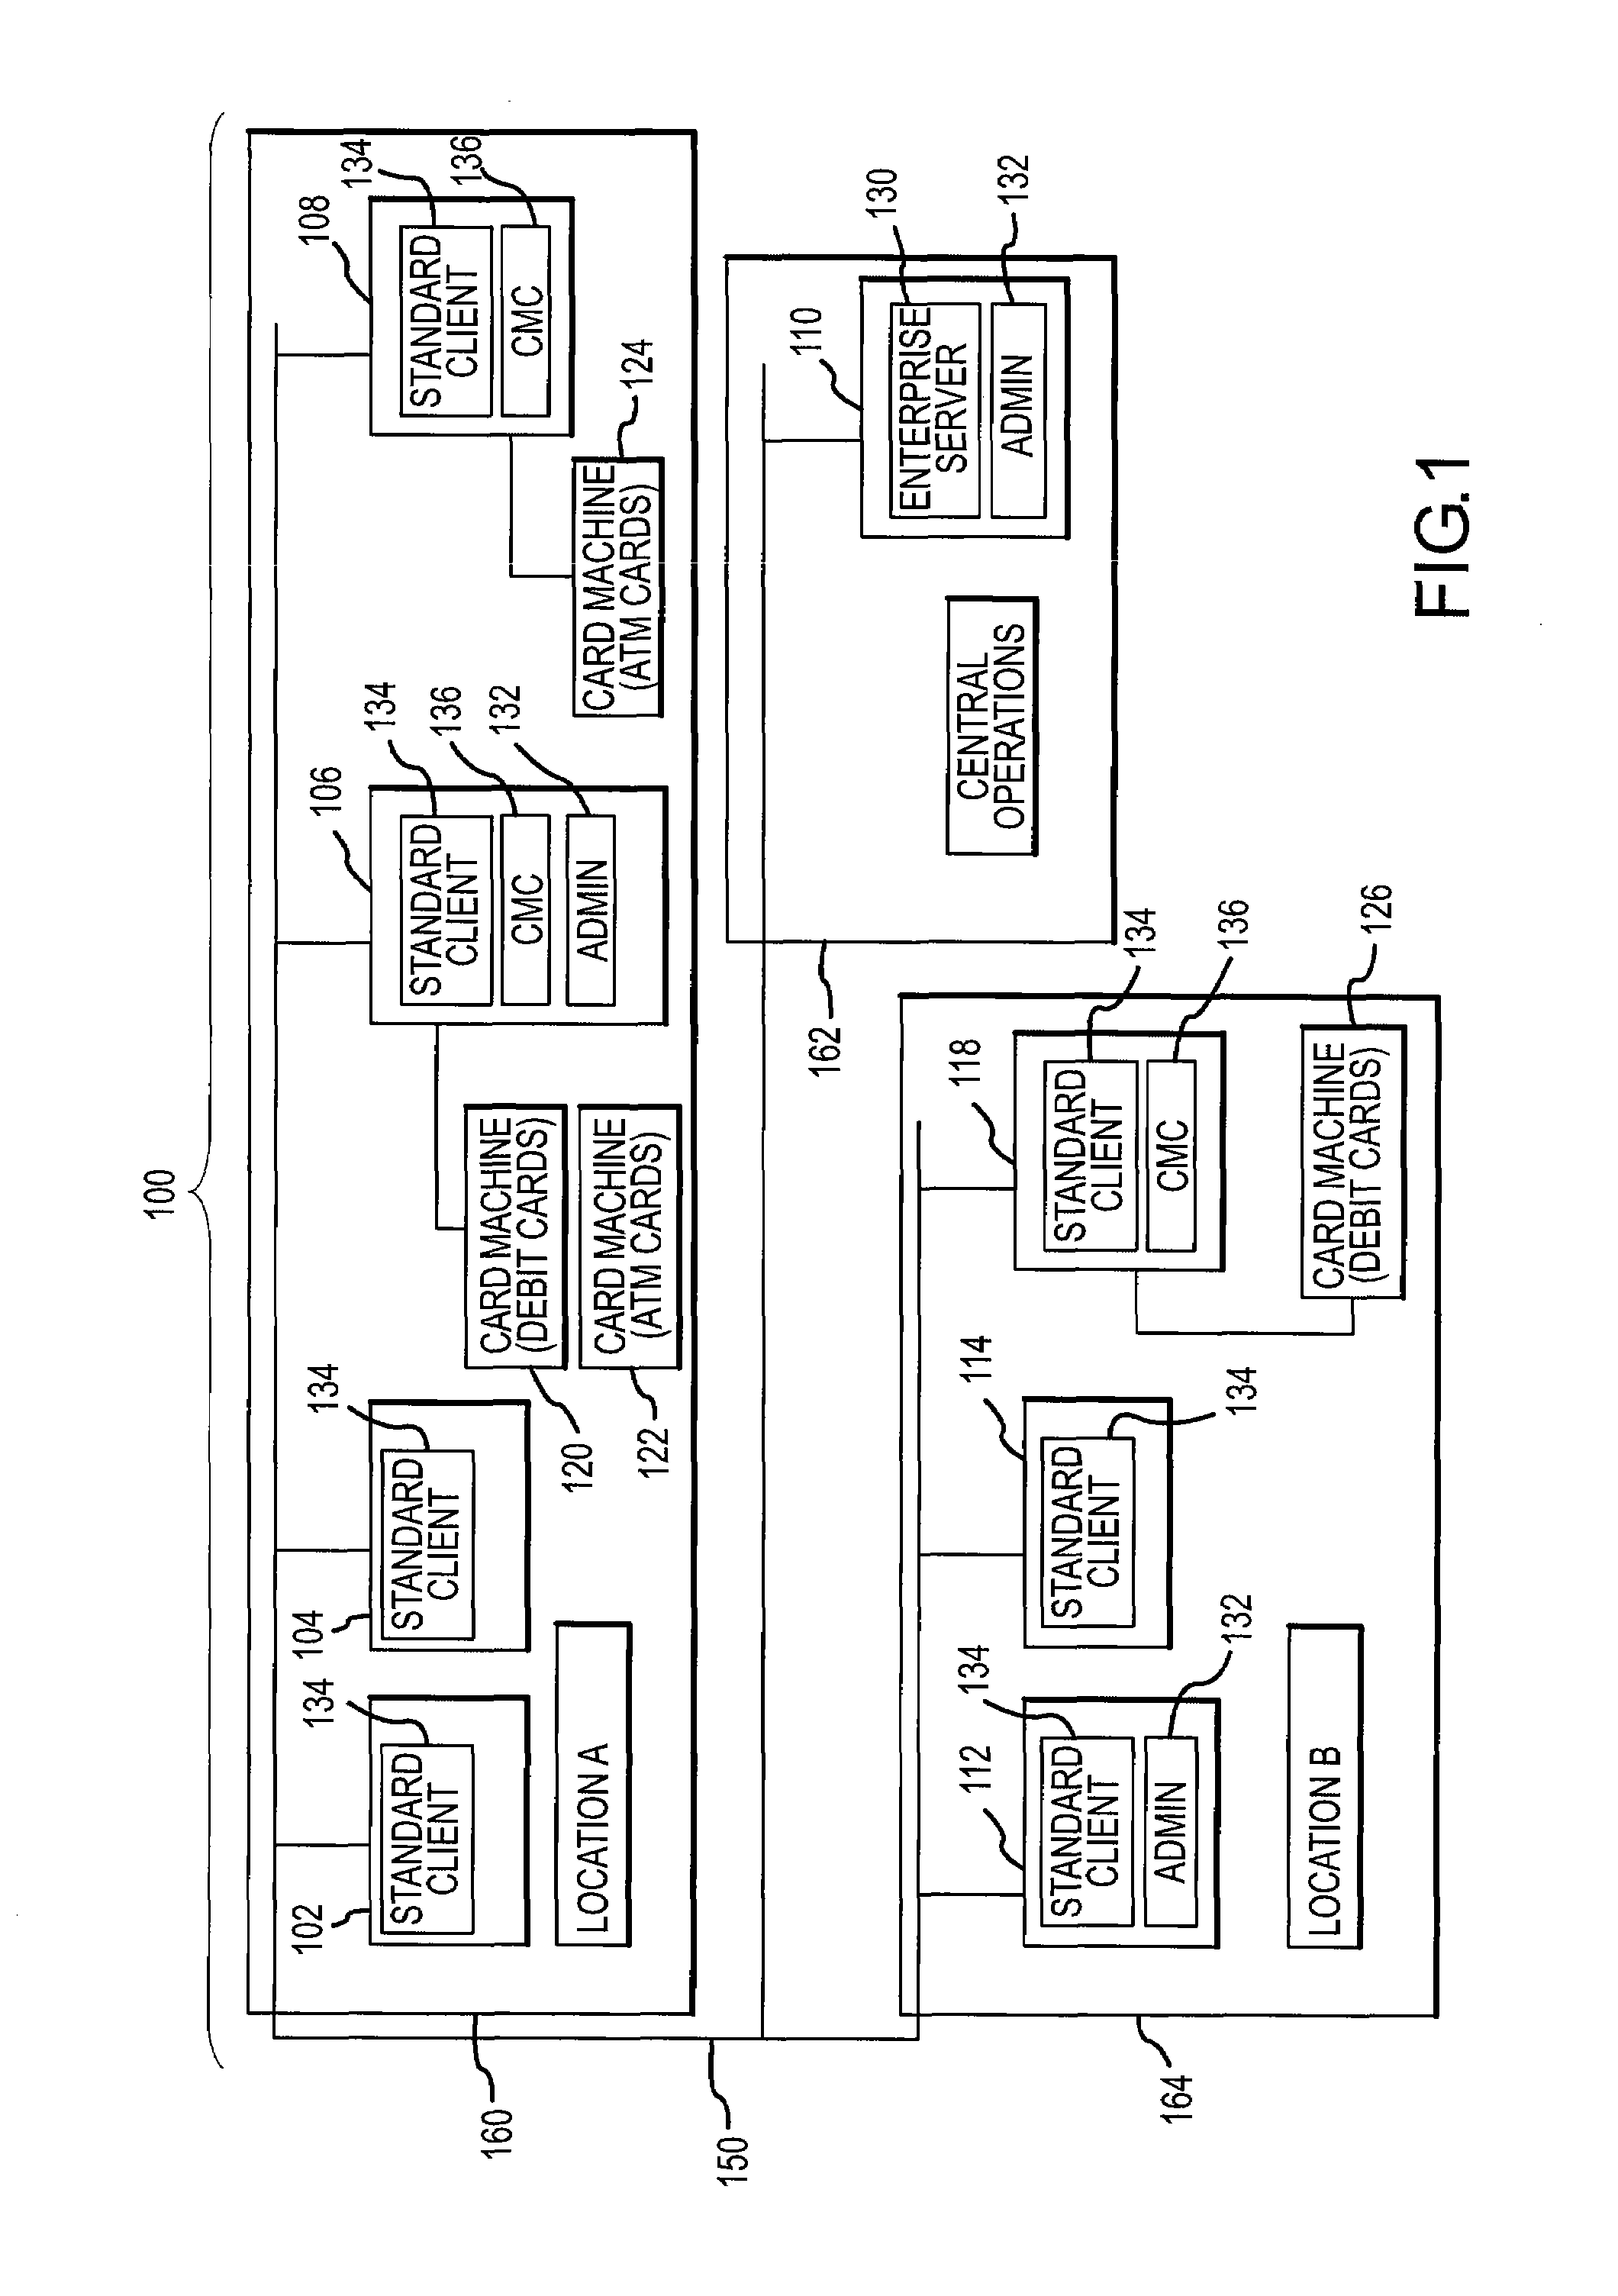 Systems and methods for enterprise based issuance of identification cards